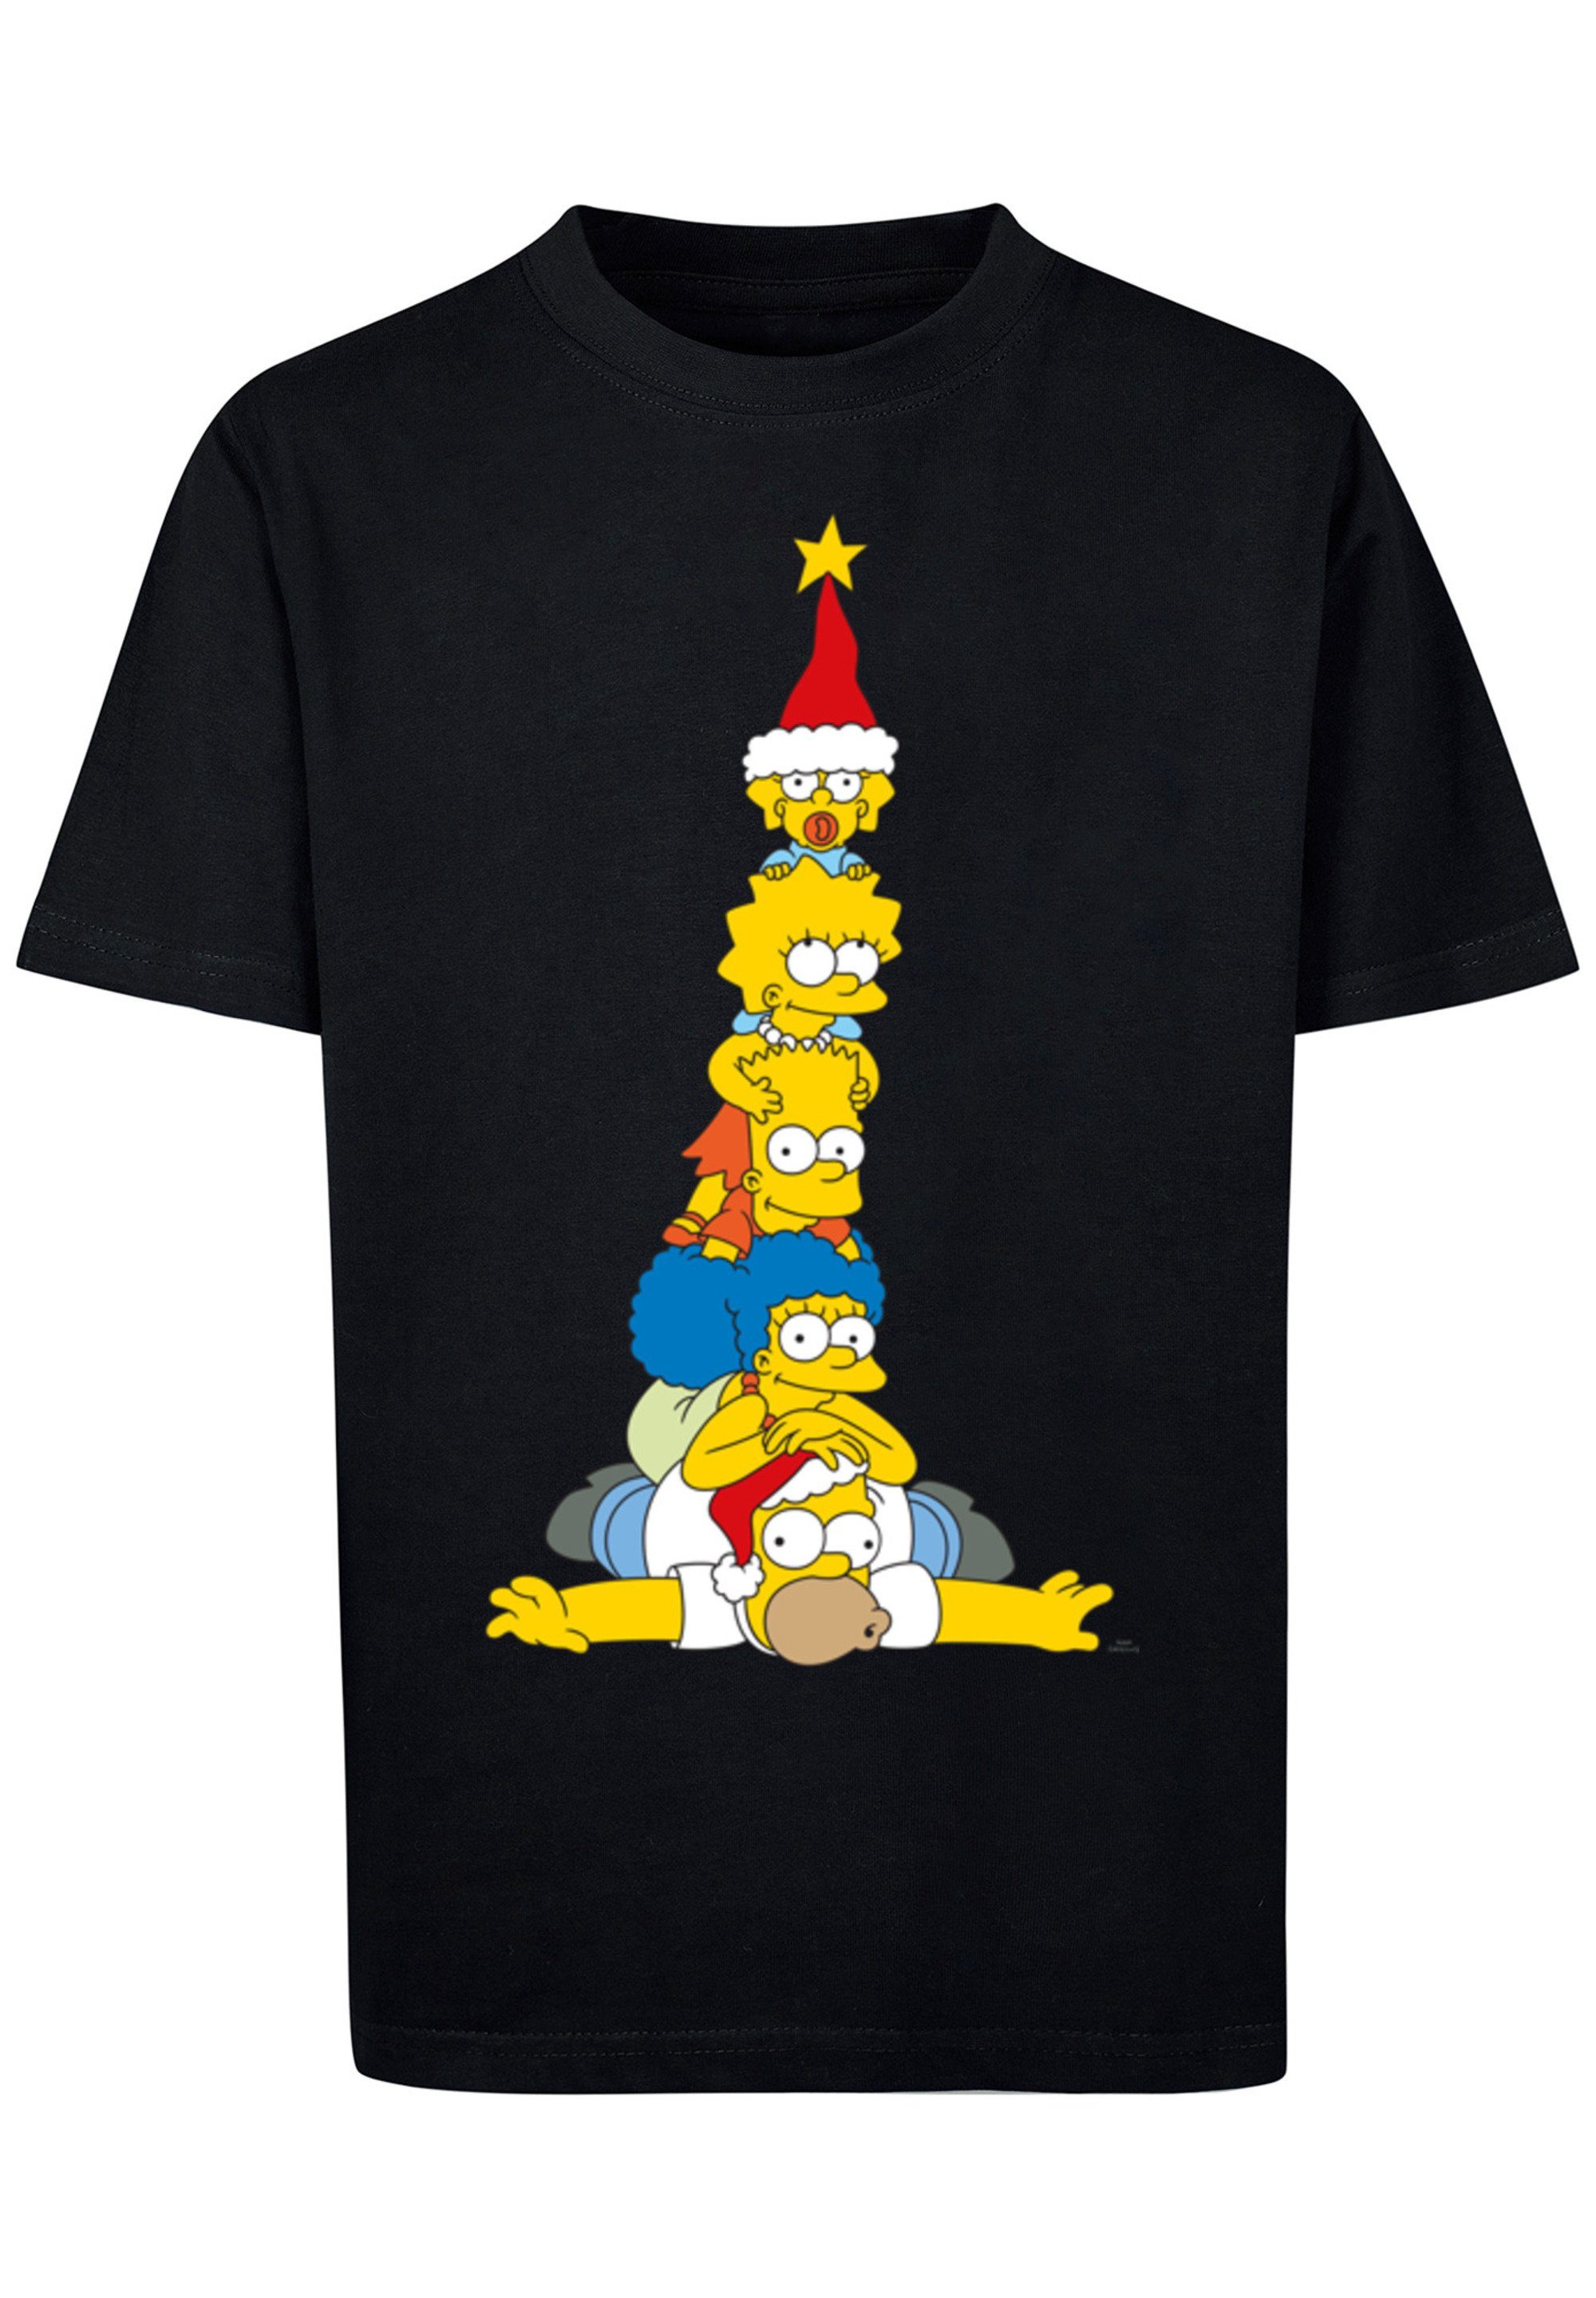 T-Shirt F4NT4STIC Print The Christmas schwarz Family Simpsons Weihnachtsbaum